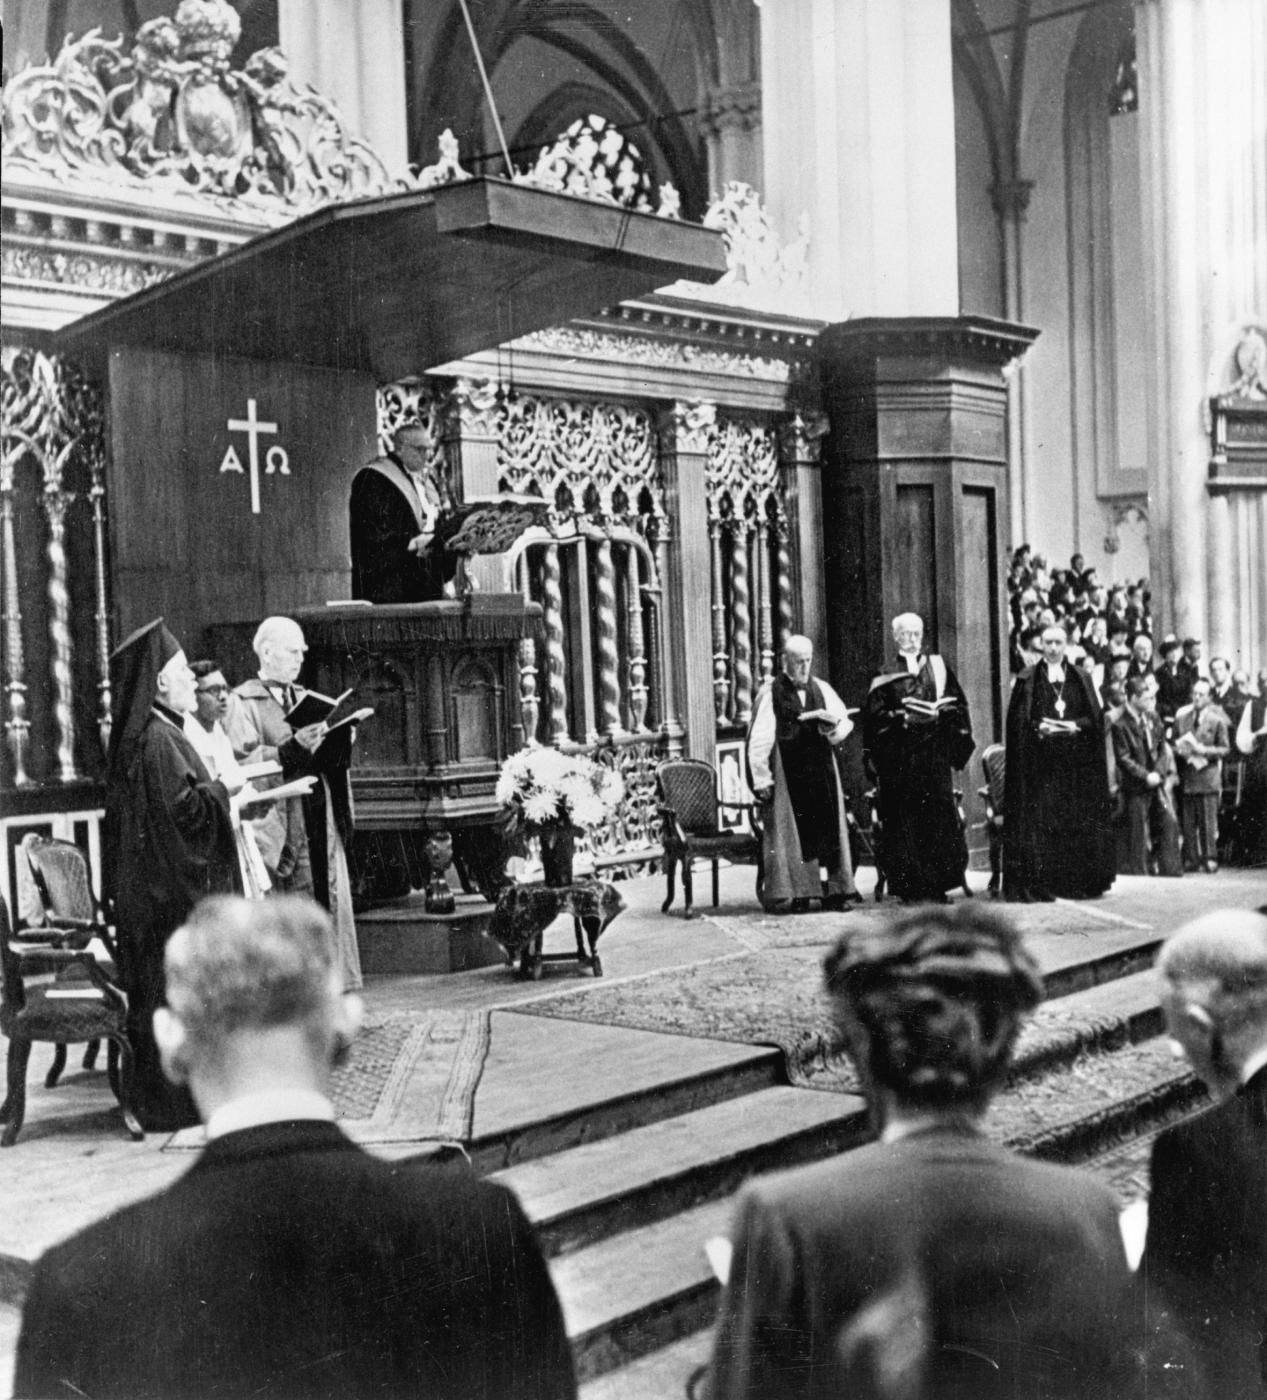 Opening service of the 1st assembly of WCC in Amsterdam, 1948. Left to right: Dr S. Germanos, Dr D.T. Niles, Dr John Mott, Dr K.H.E. Gravemeyer, Dr G.F. Fisher, Archibshop of Canterbury, Dr Marc Boegner, Dr E. Eidem.